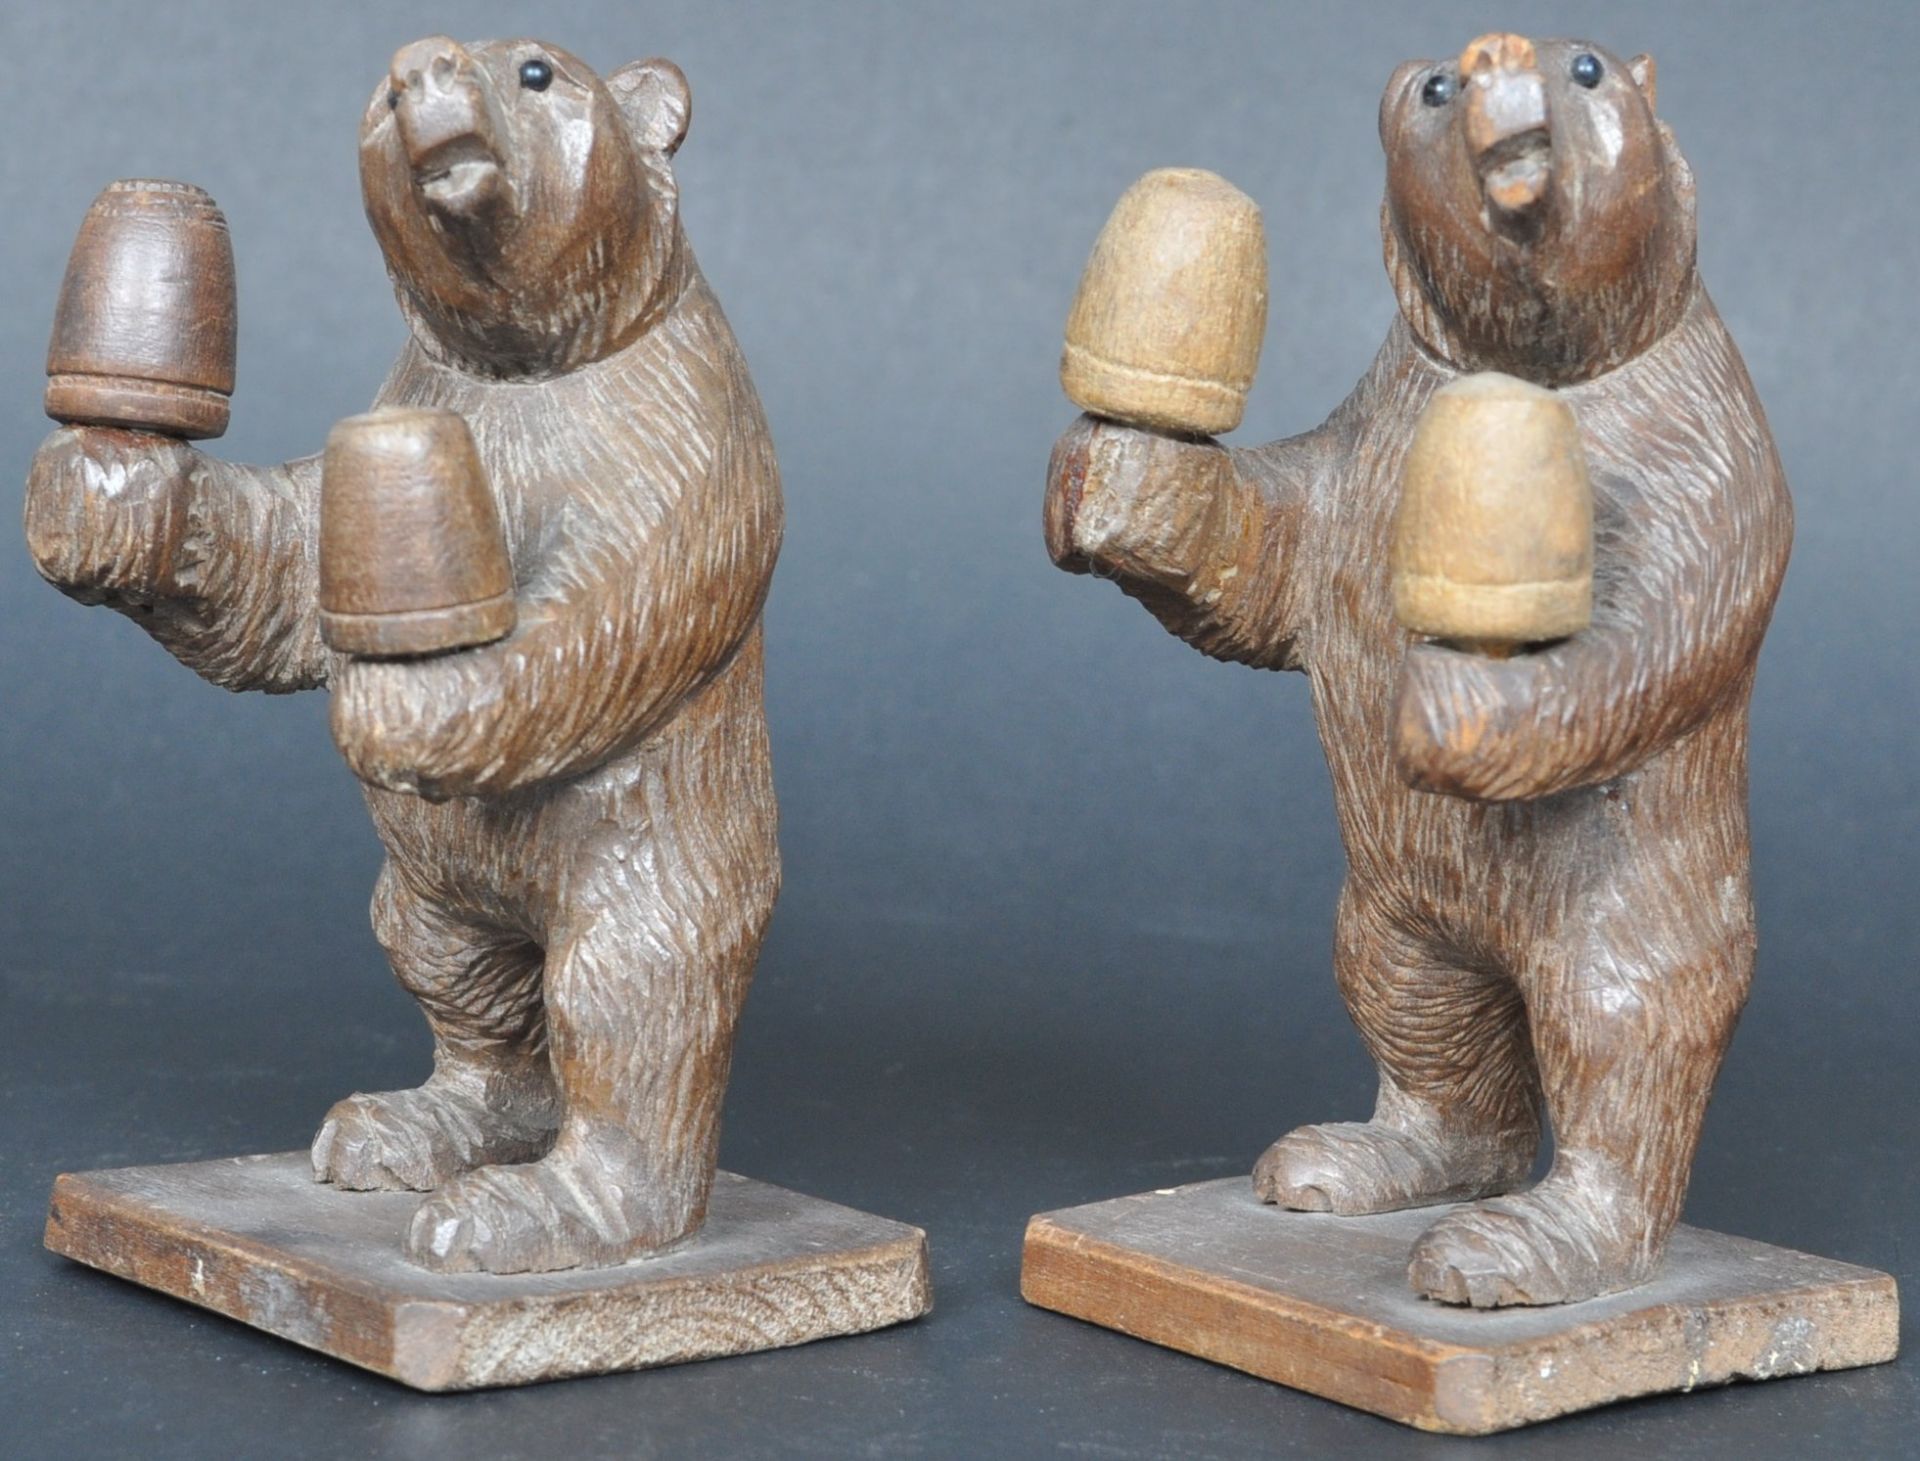 PAIR OF 19TH CENTURY BLACK FOREST CARVED BEAR THIMBLE HOLDERS